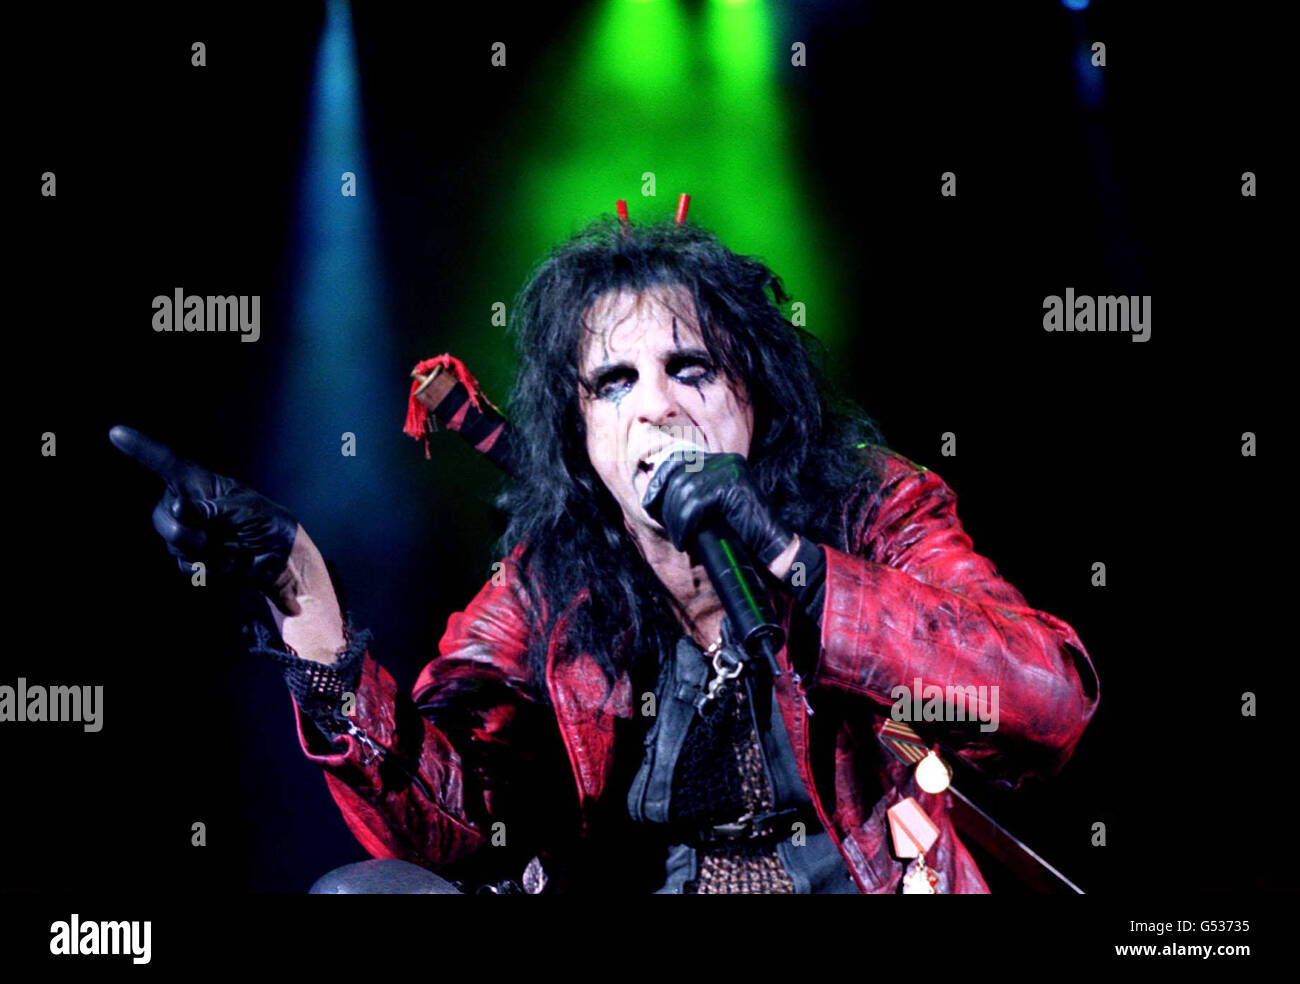 4TH FEBRUARY : On this day in 1948 rock singer Alice Cooper was born. Veteran American metal rock singer Alice Cooper performing on stage at the Hammersmith Apollo, in west London. 05/05/04: The rock star, whose hits include School's Out, is being awarded an honorary doctorate by a Christian liberal arts university, it was announced. The 56-year-old will receive the honour at a Grand Canyon University ceremony on Saturday. Stock Photo